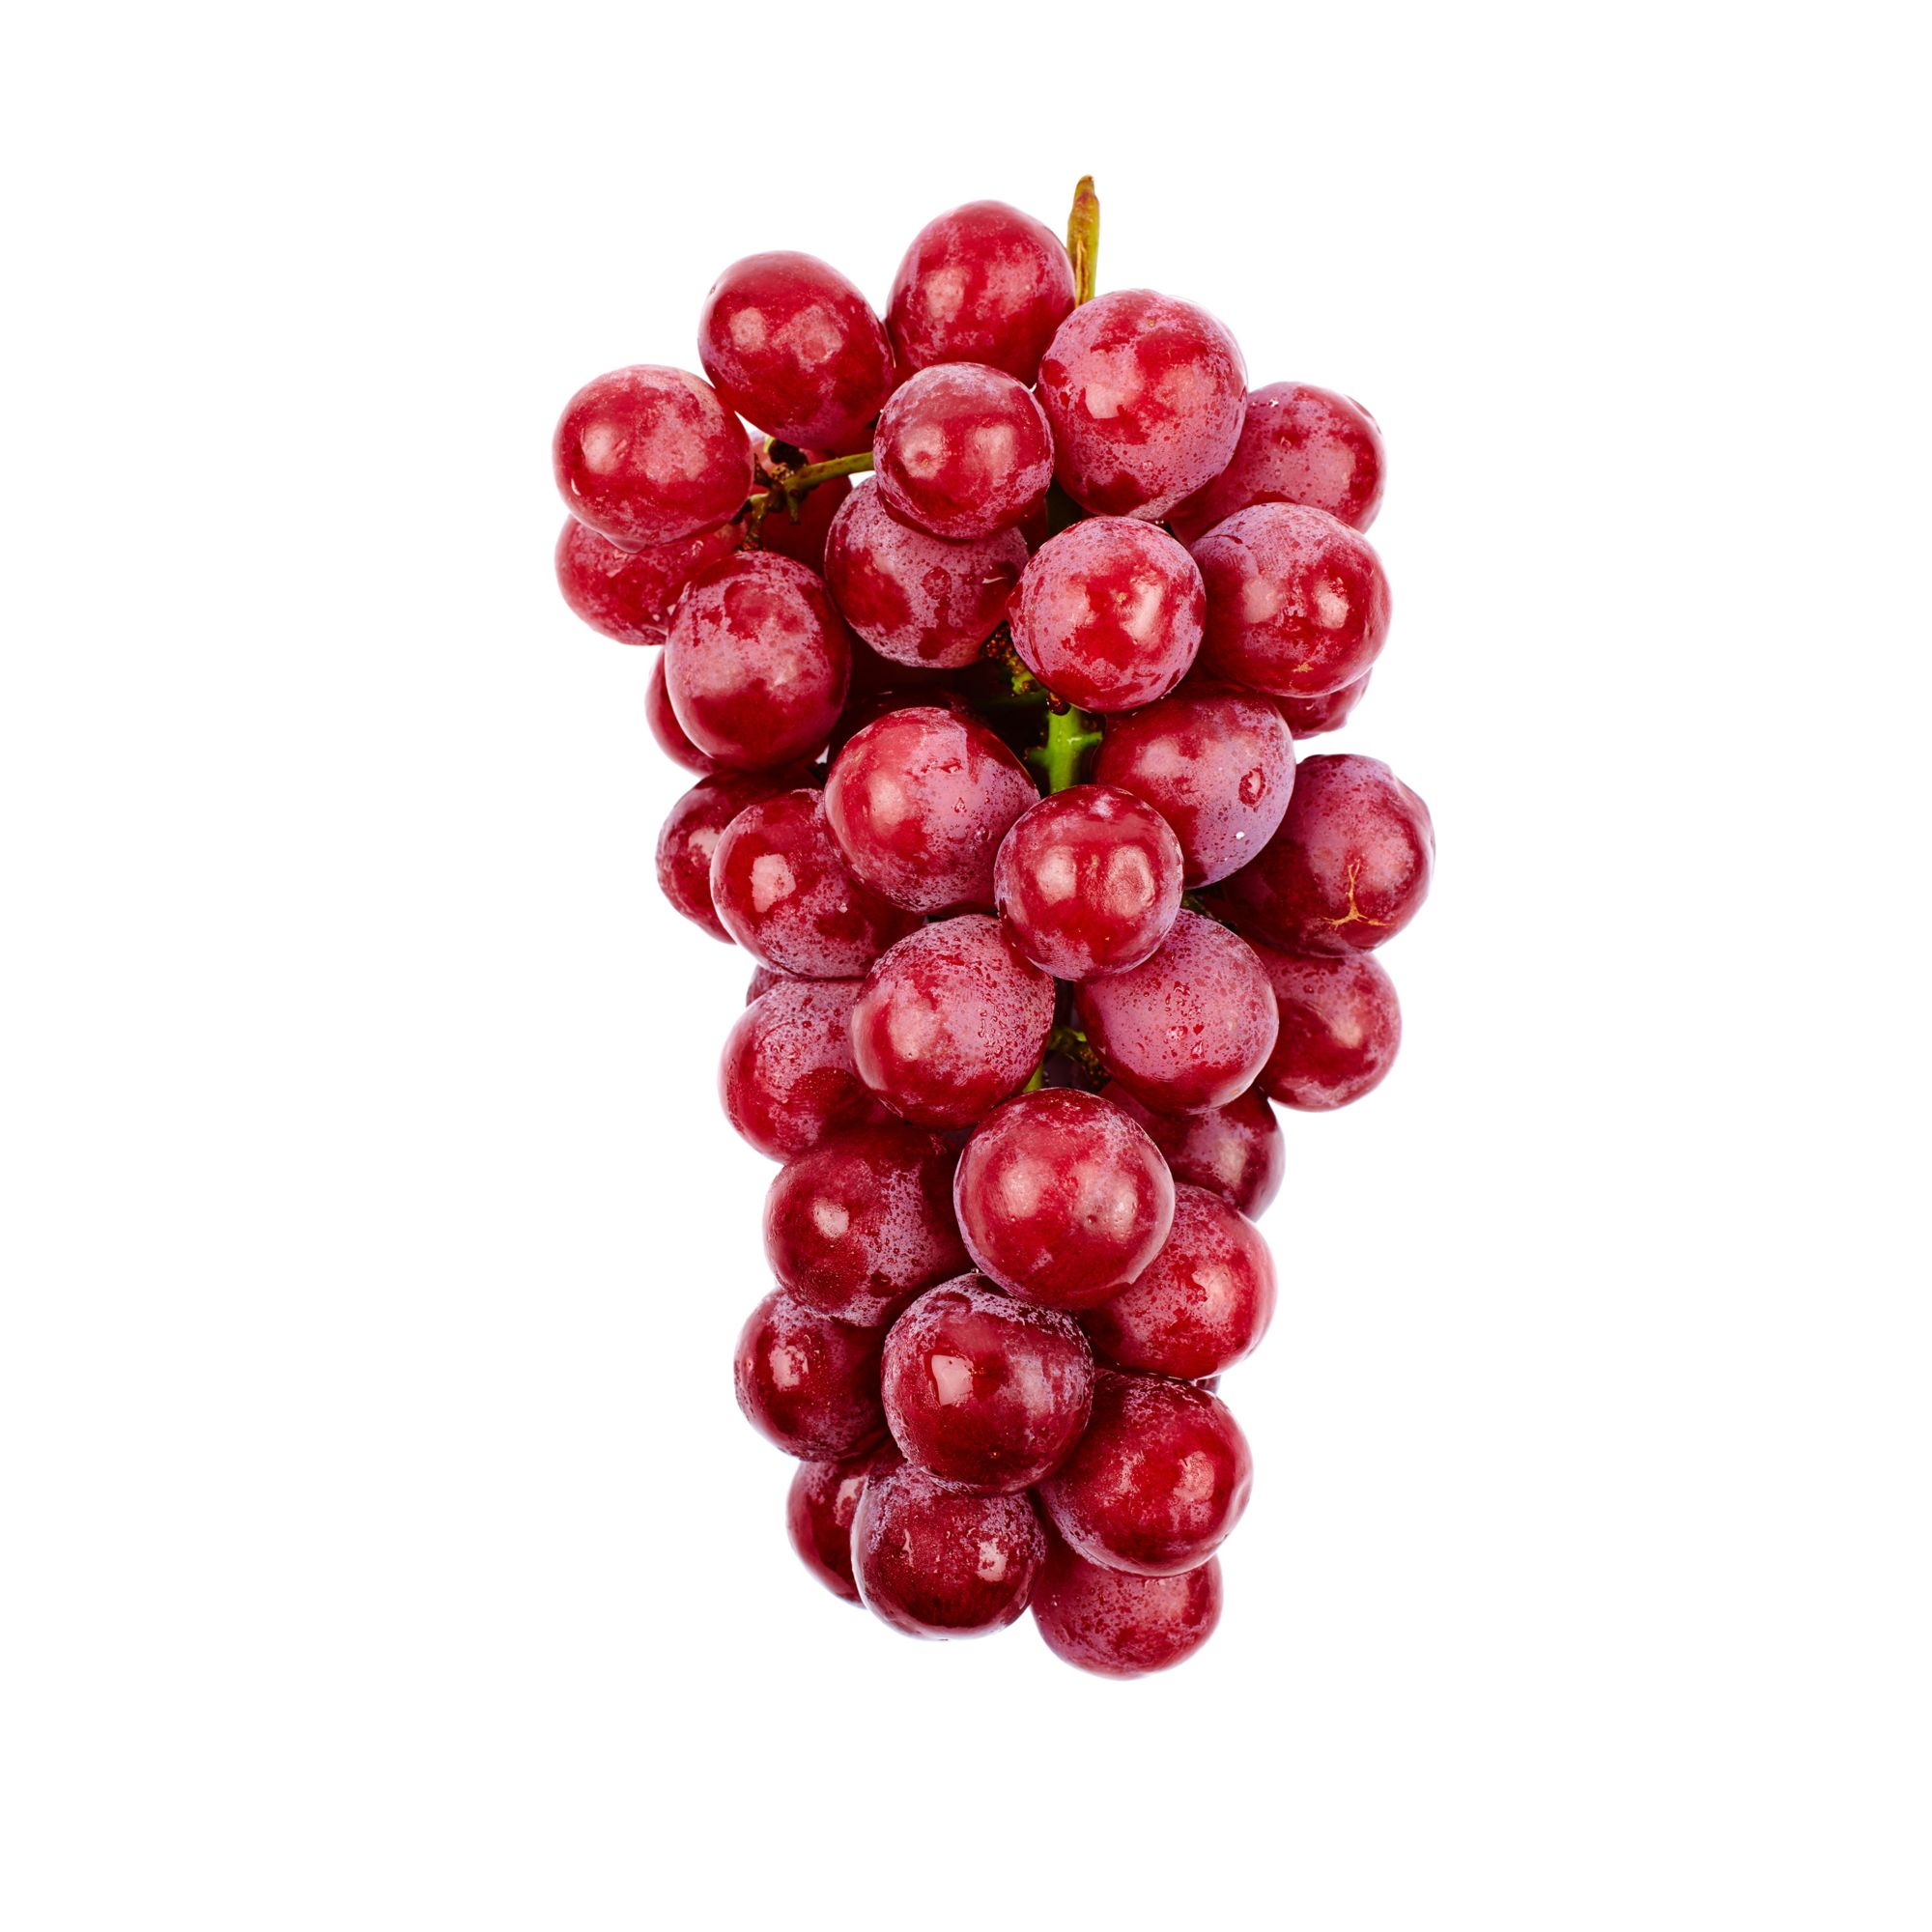 Welch's Grapes, Red, Seedless 3 Lb, Grapes